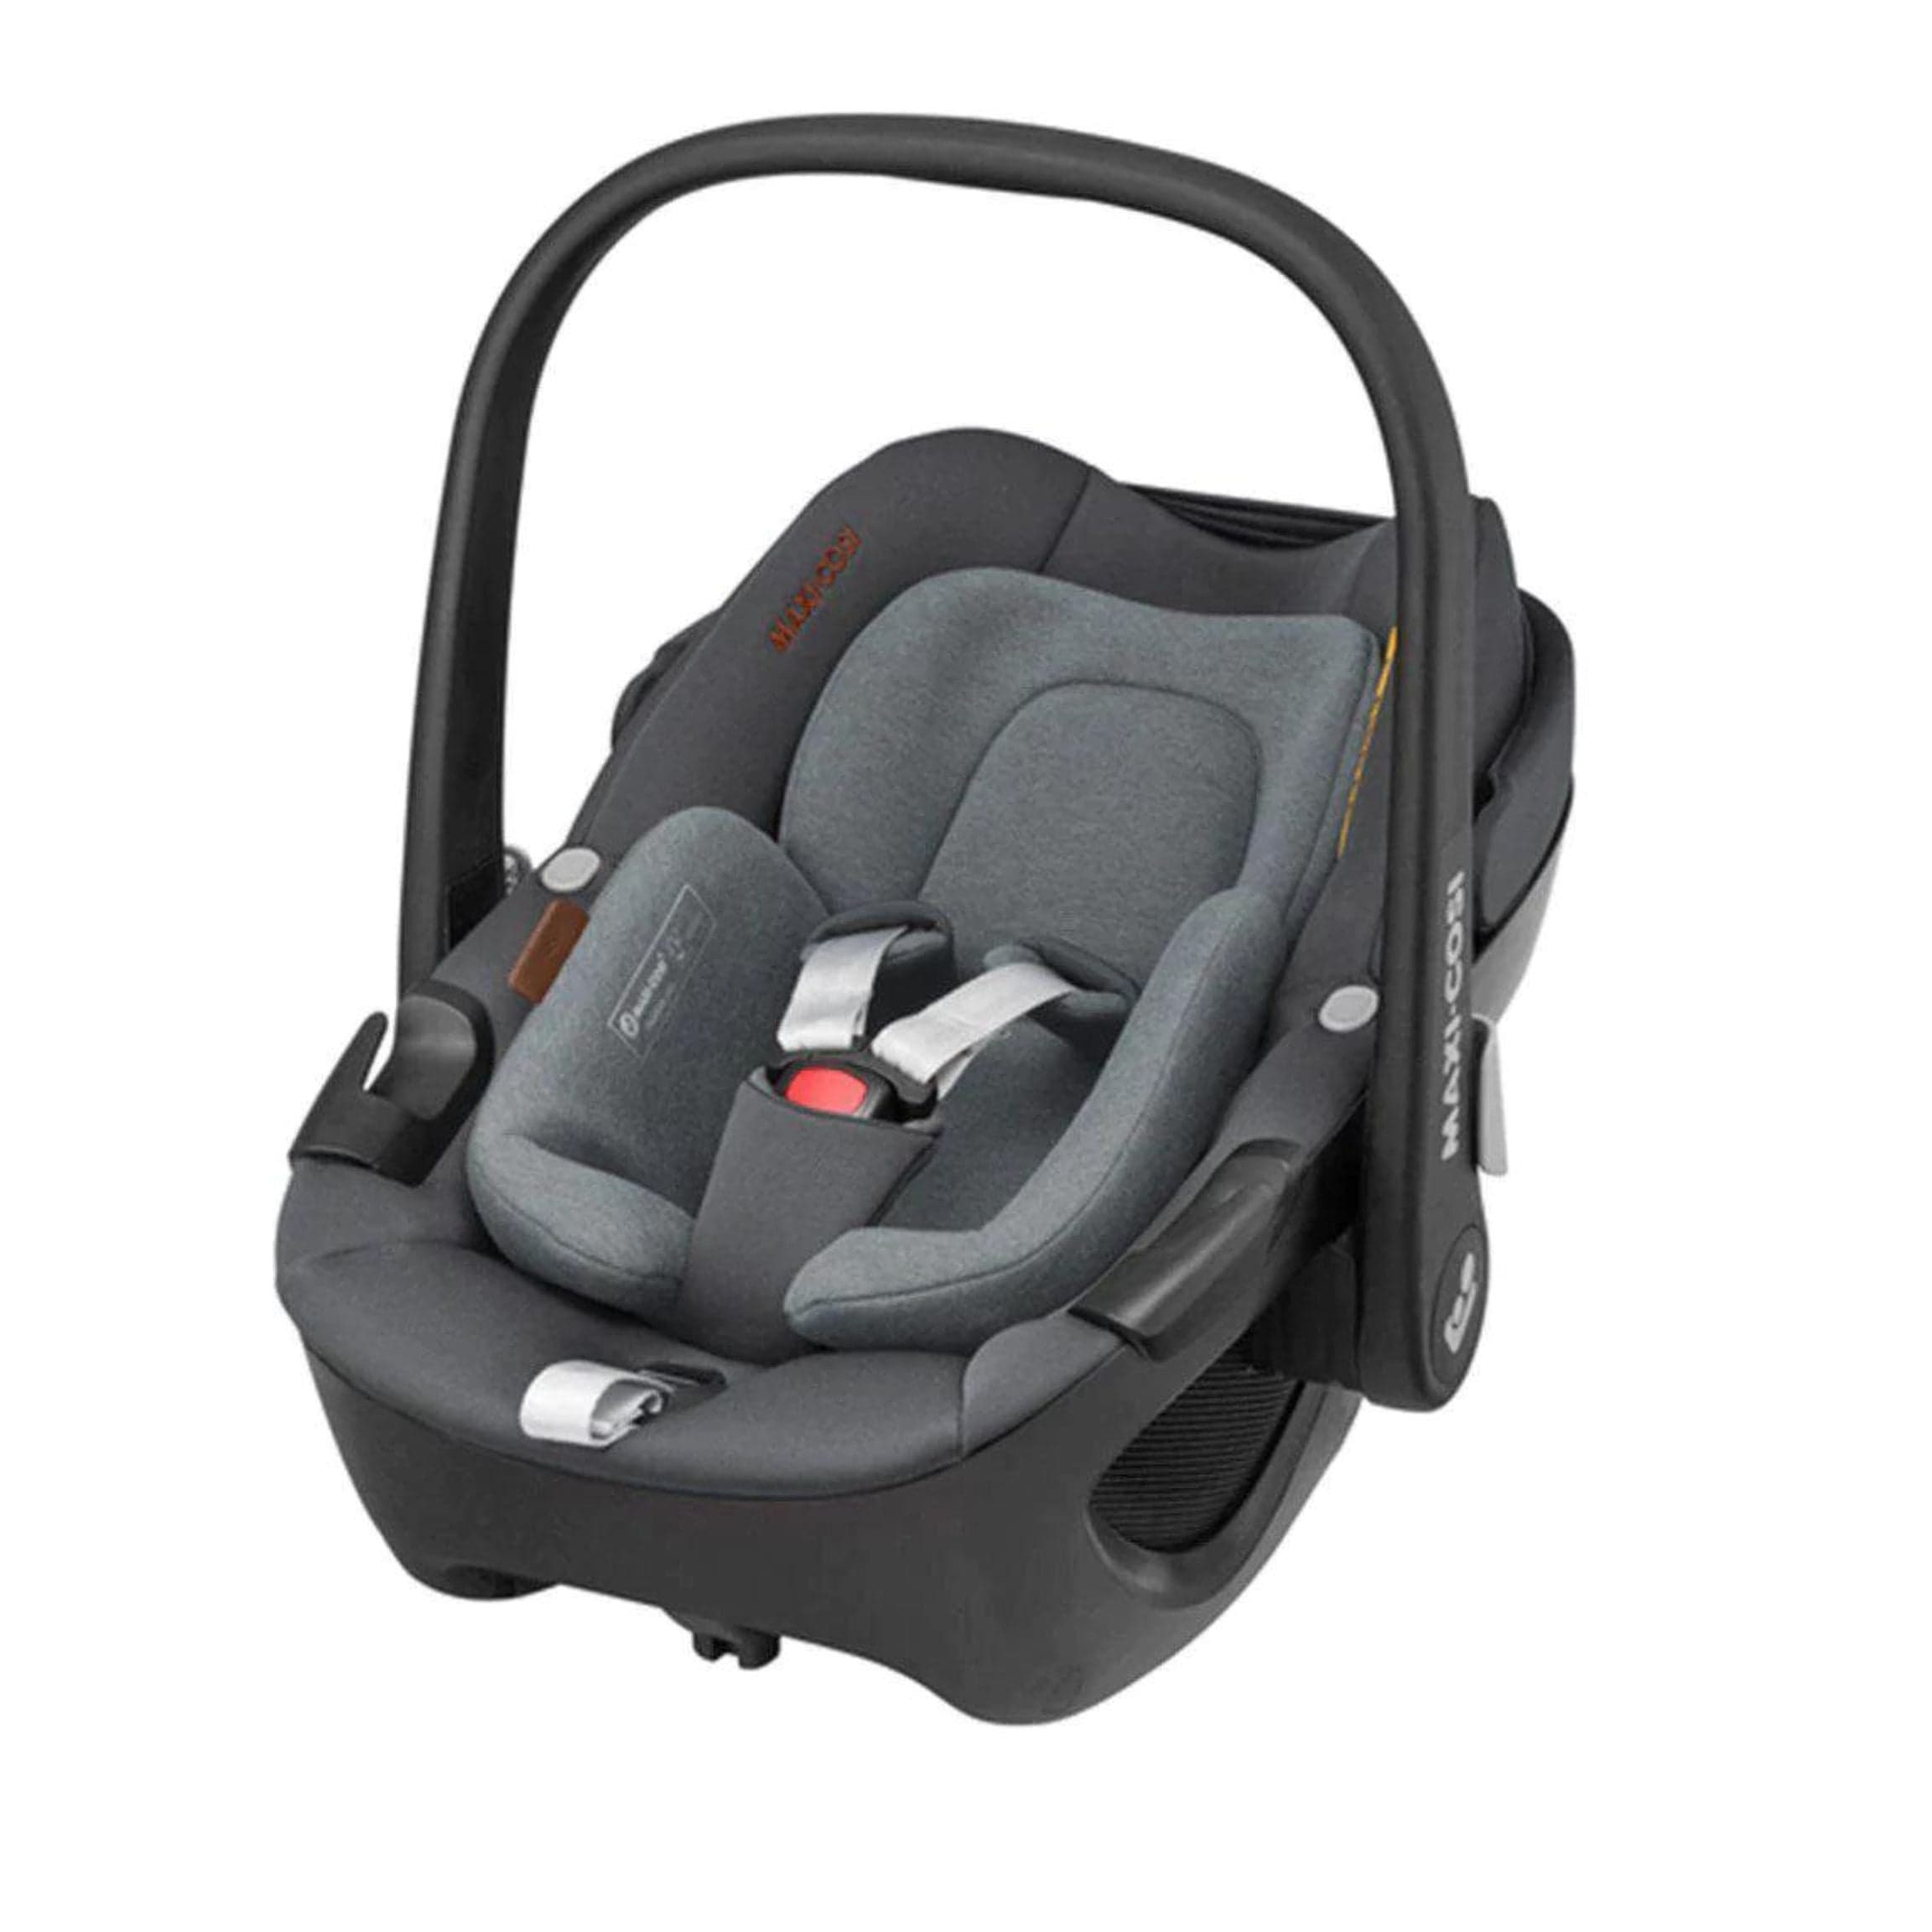 Maxi-Cosi Adorra Luxe Pebble 360 Travel System & Base in Twillic Grey Travel Systems KF51400000 3220660326686